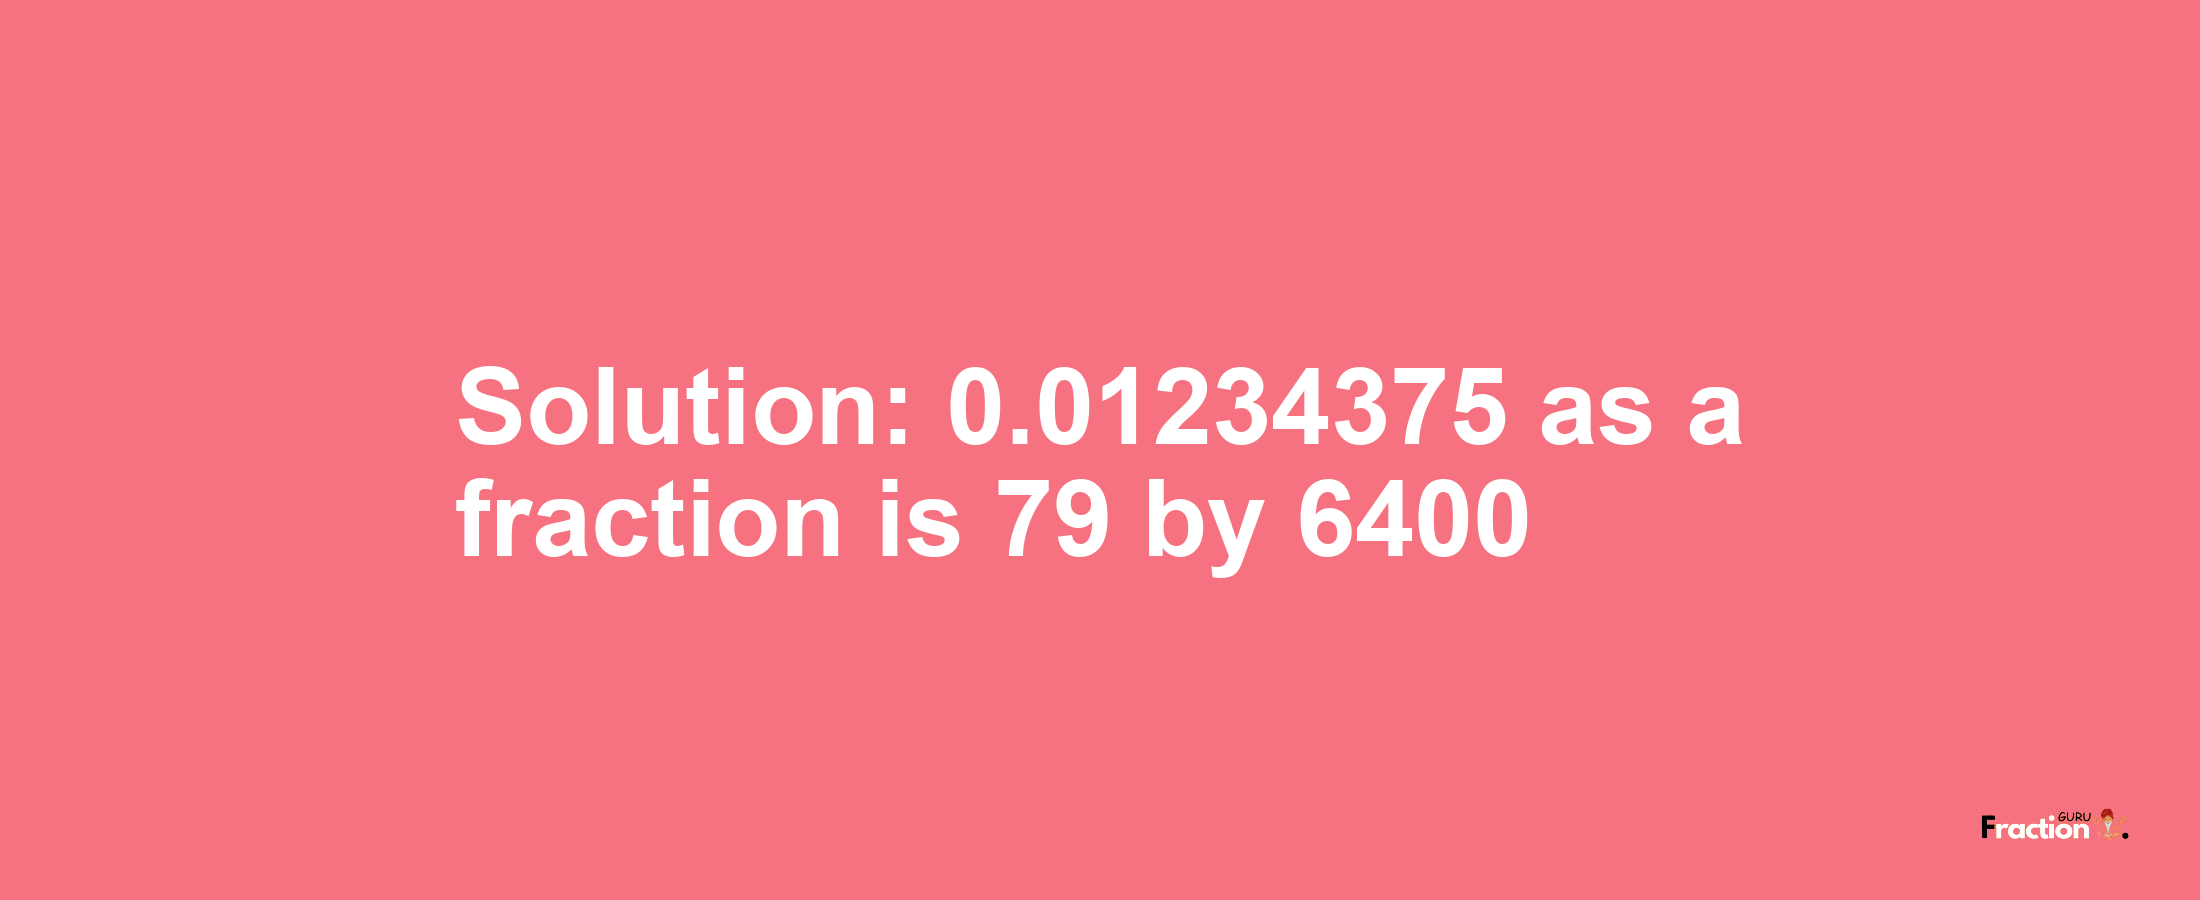 Solution:0.01234375 as a fraction is 79/6400